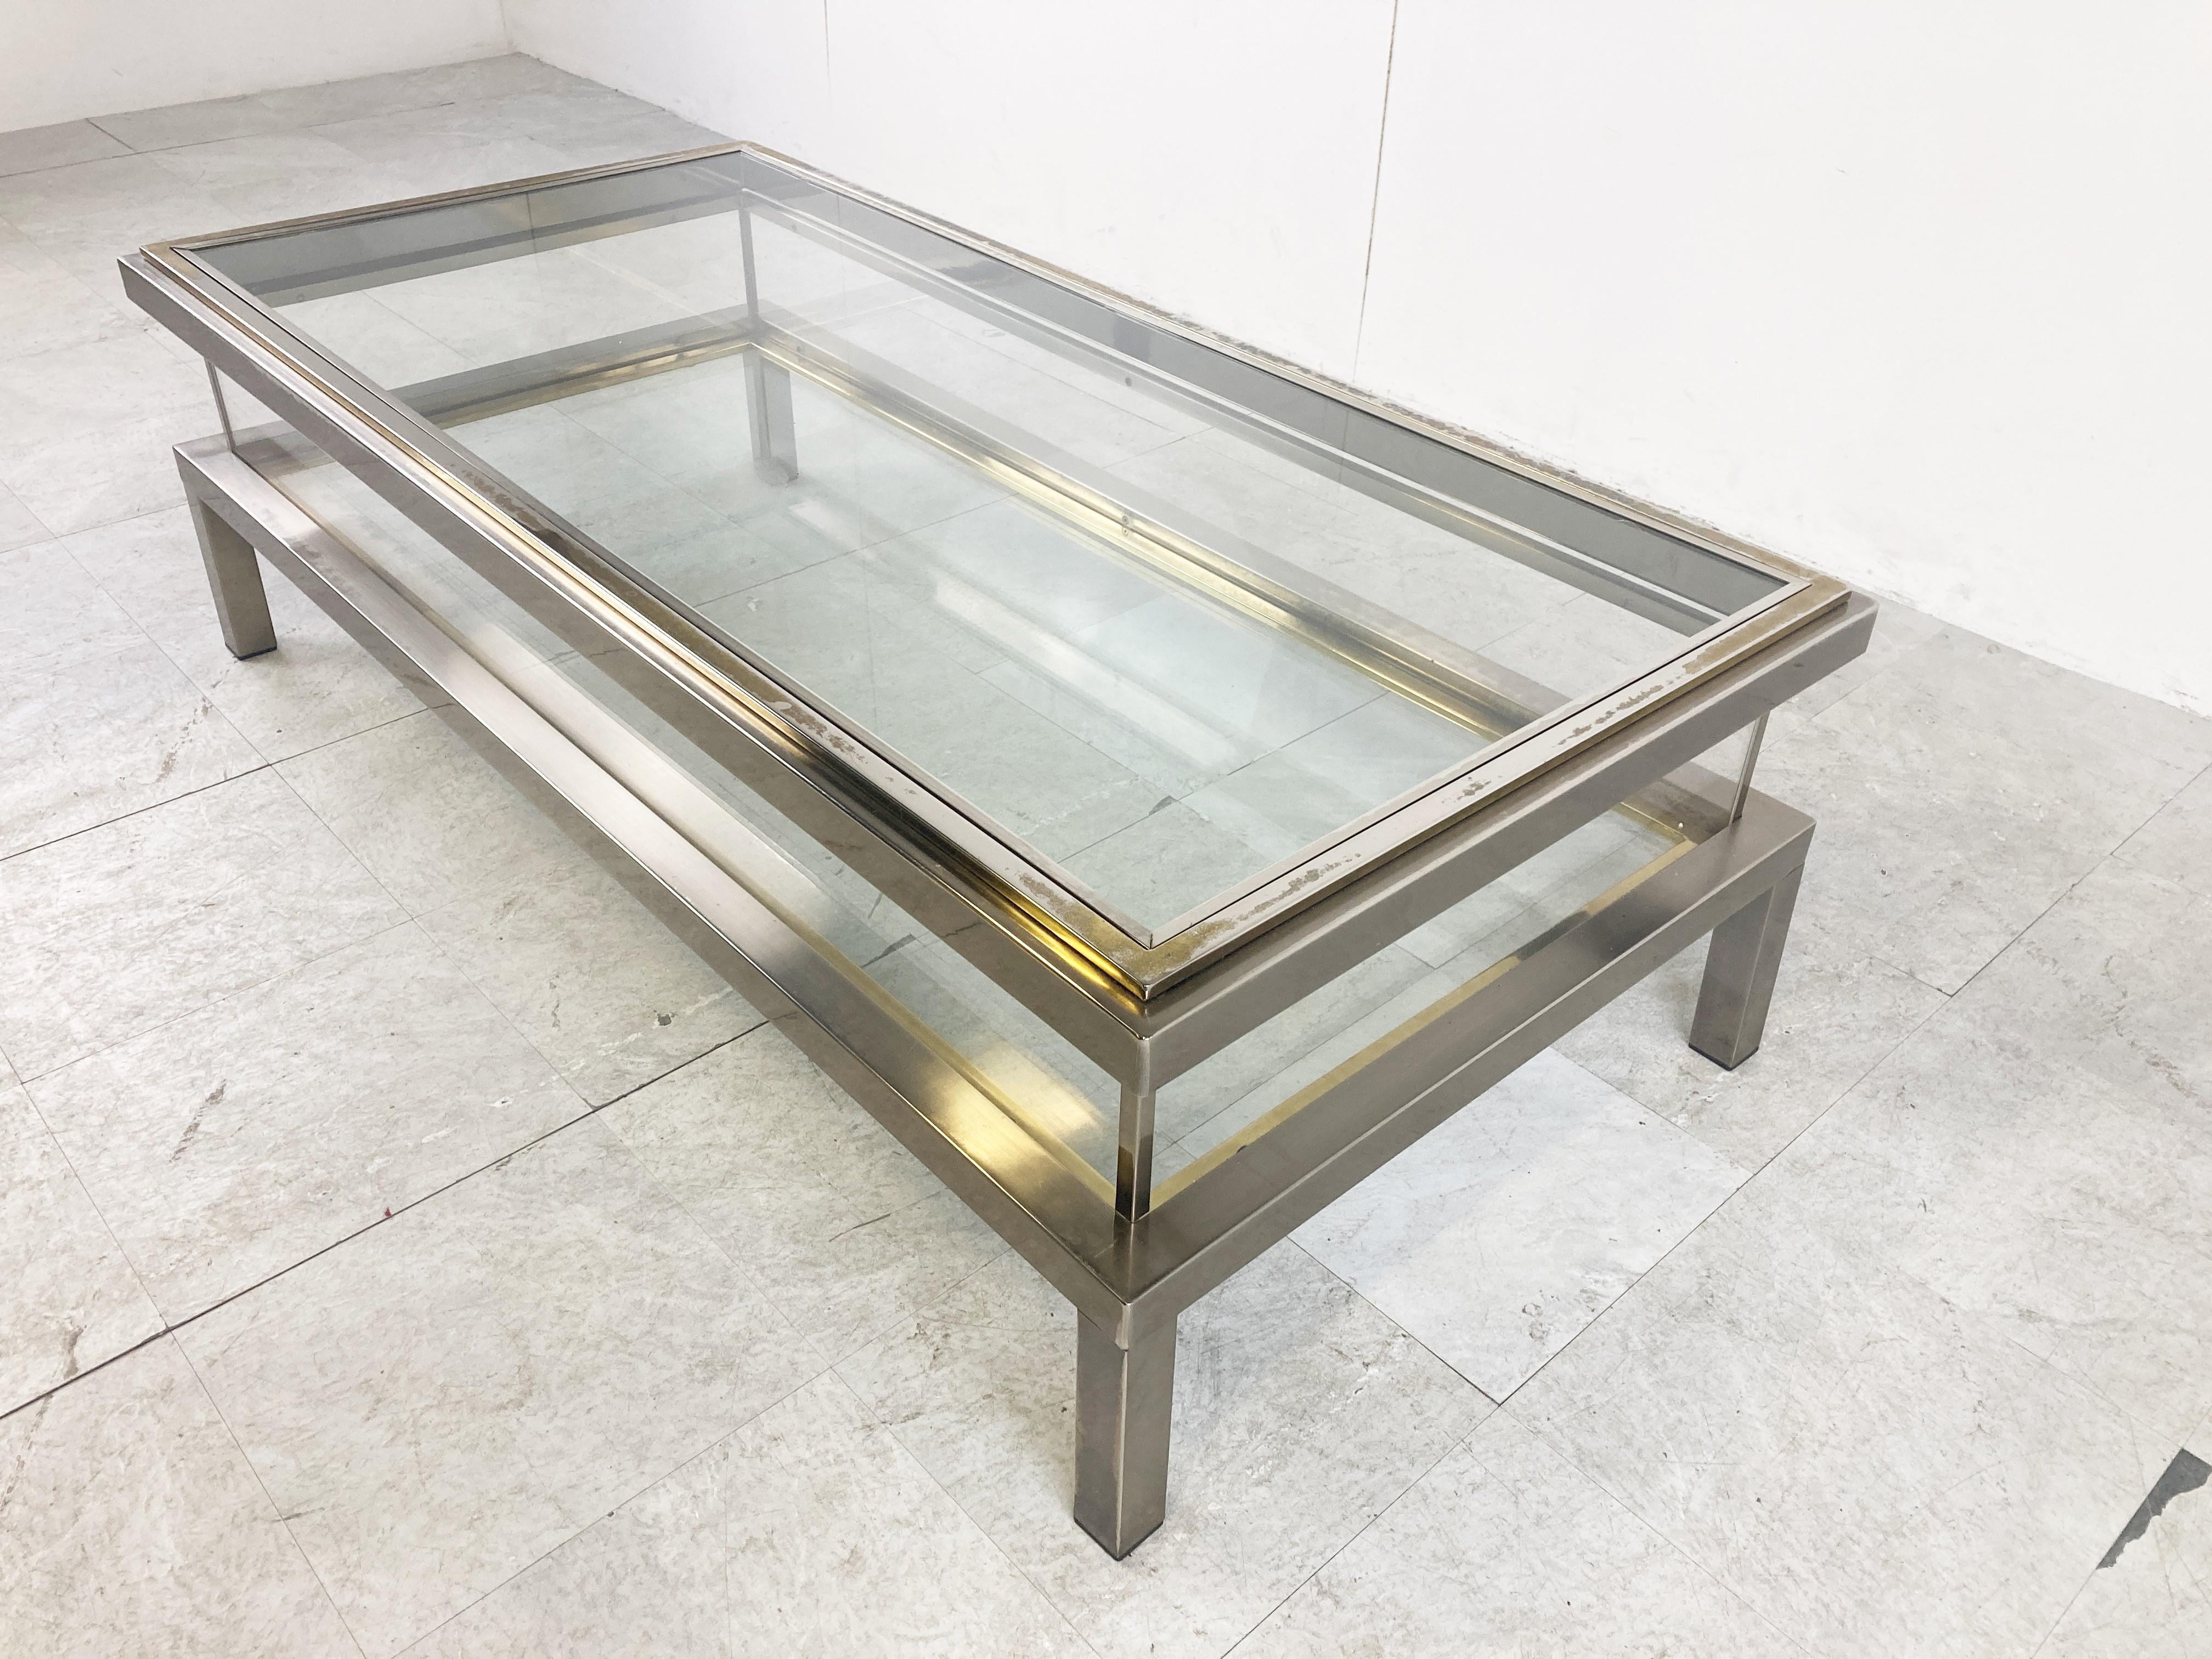 Vintage display coffee table with a sliding glass top.

This luxurious coffee table is made from brass, glass top and bottom and plexiglass sides.

It is ideal to display curio and store magazines,...

The brass on top is faded but overall the